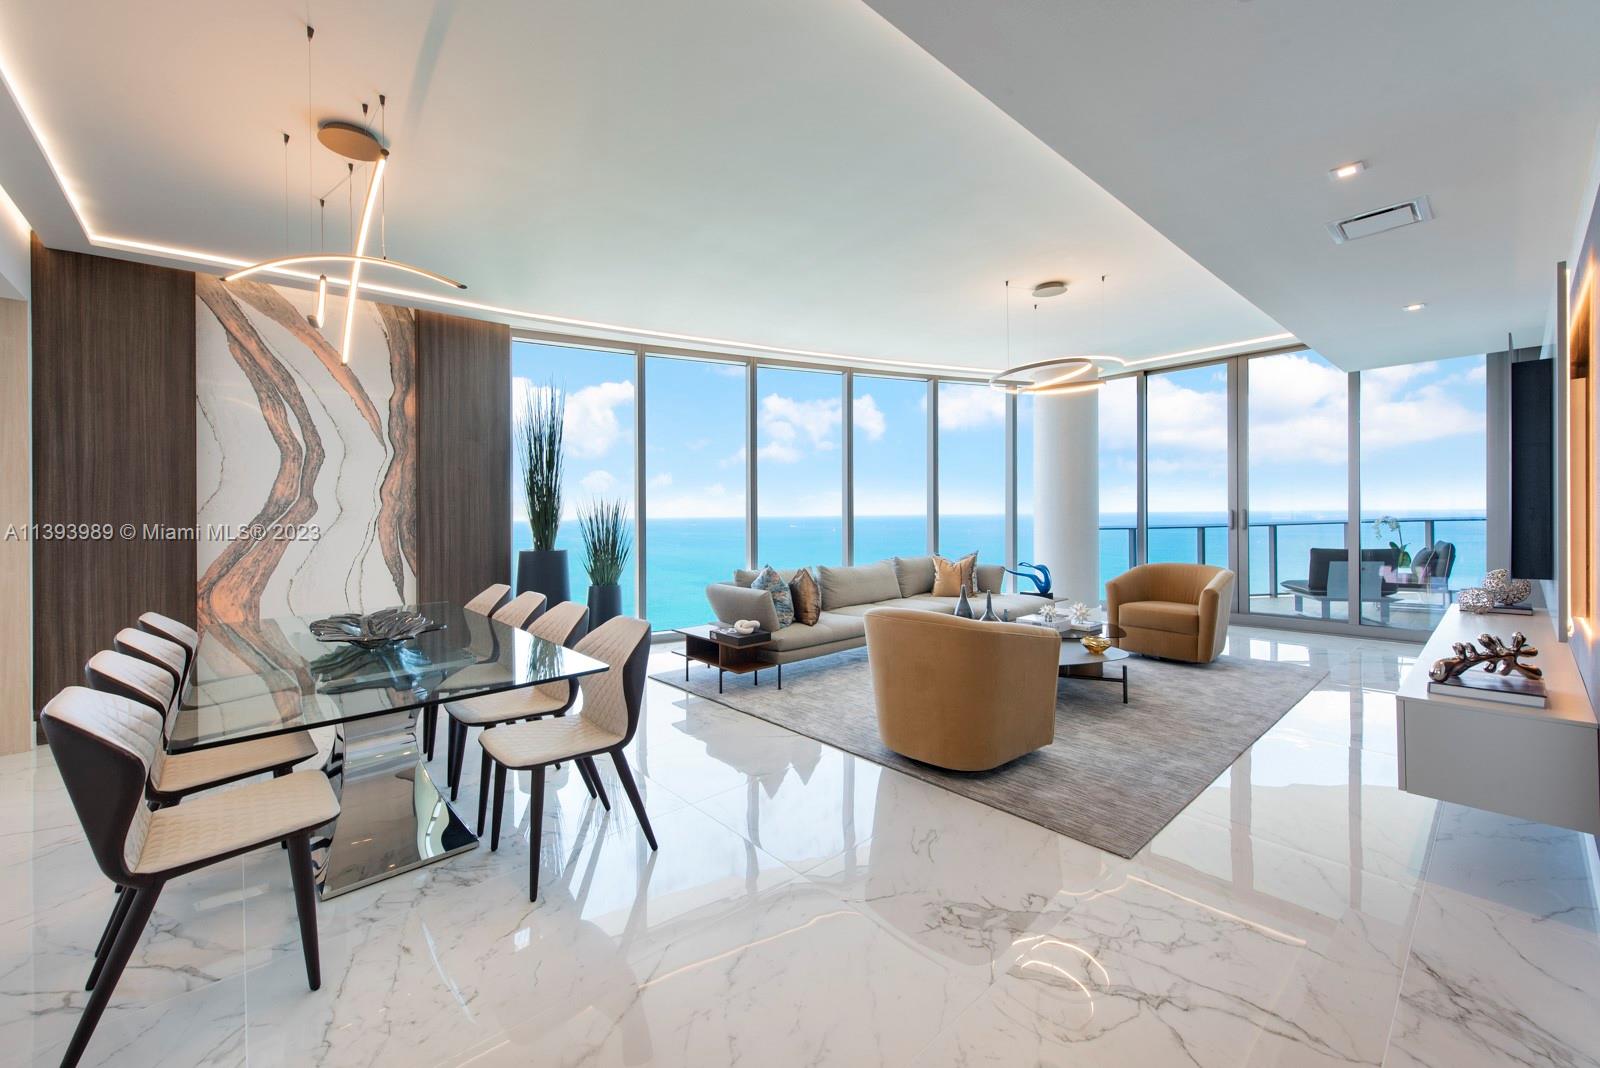 Luxury stunning brand new apt at the amazing Ritz-Carlton Residence at Sunny Isles Beach. Enjoy forever direct waterfront view of crystal clear blue ocean from every room. 2 Large terraces. 3bs+den/4.5bth. Comes fully furnished. Private elevator foyer. Open kitchen with European appliances, stone countertops, imported Italian cabinetry, marble accented baths Designed by Arquitectonica and interiors by Italian designer Michele Bönan. Unsurpassed amenities include: concierge, valet, restaurant & room service, beach & pool services, 2 swimming pools, hot tub, movie theater, oceanfront gym and Spa, wine lounge, game room, complimentary continental breakfast every day and much more. Ritz Carlton has no limits to offer its residents an extraordinary lifestyle. Offered "turn-key" fully furnished.